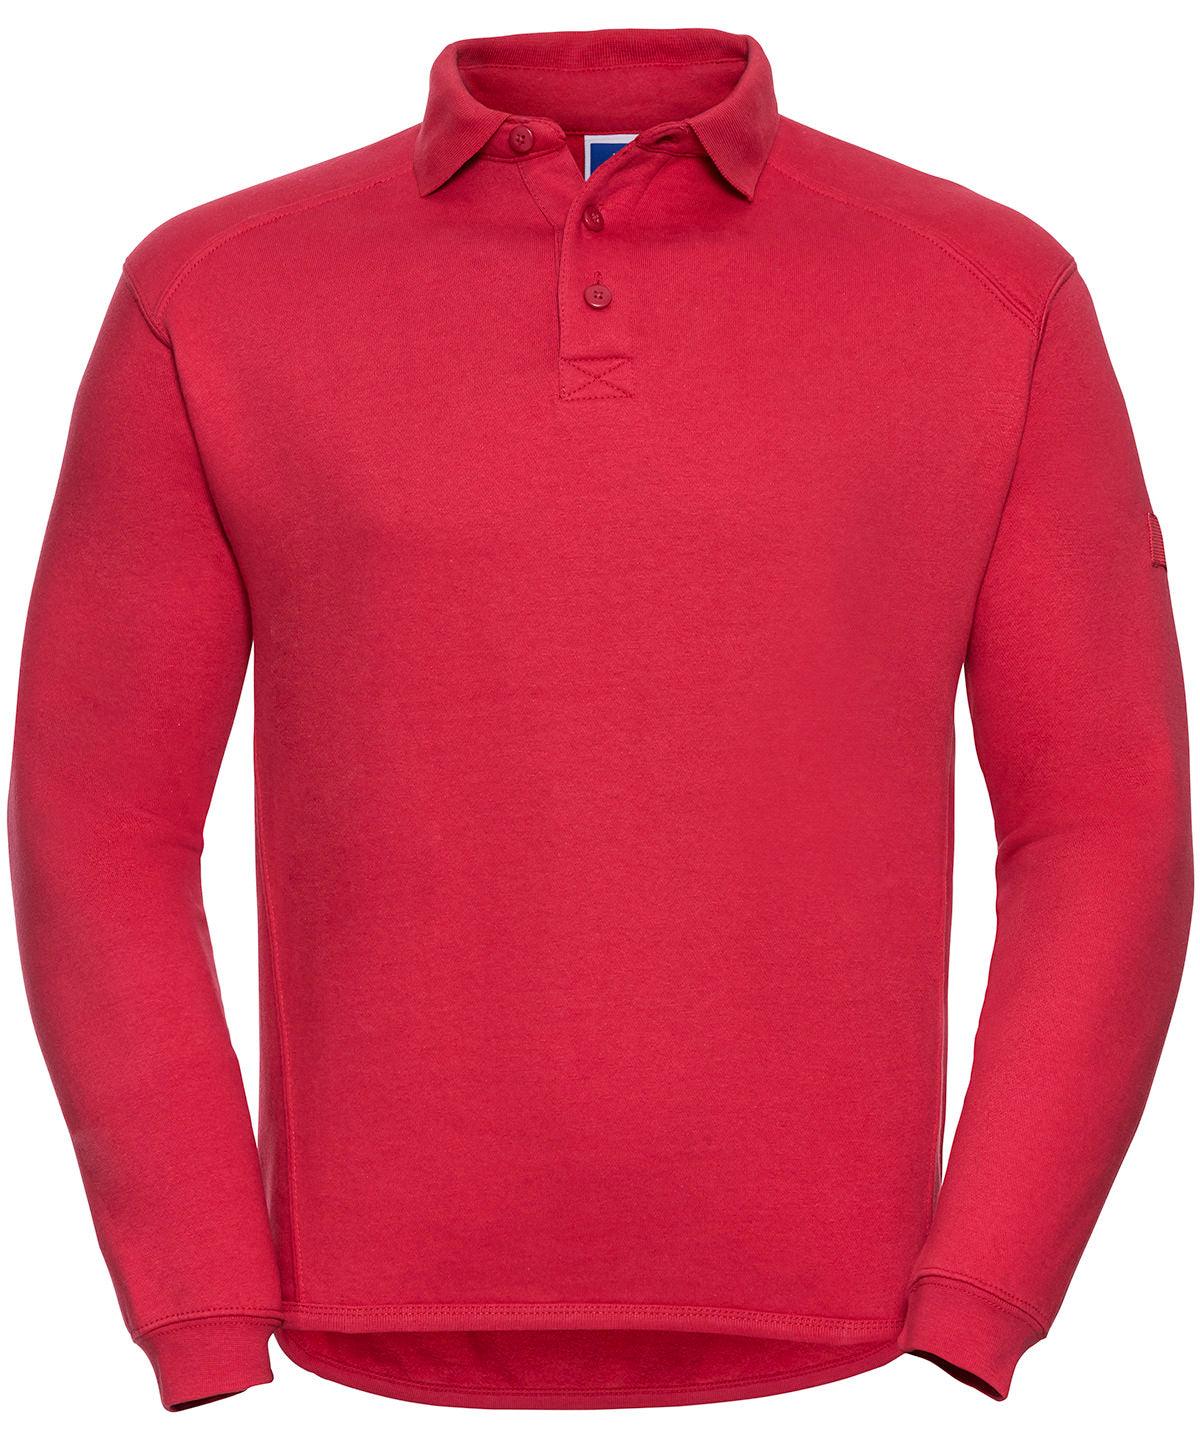 Classic Red - Heavy-duty collar sweatshirt Sweatshirts Russell Europe Must Haves, Plus Sizes, Polos & Casual, Safe to wash at 60 degrees, Workwear Schoolwear Centres